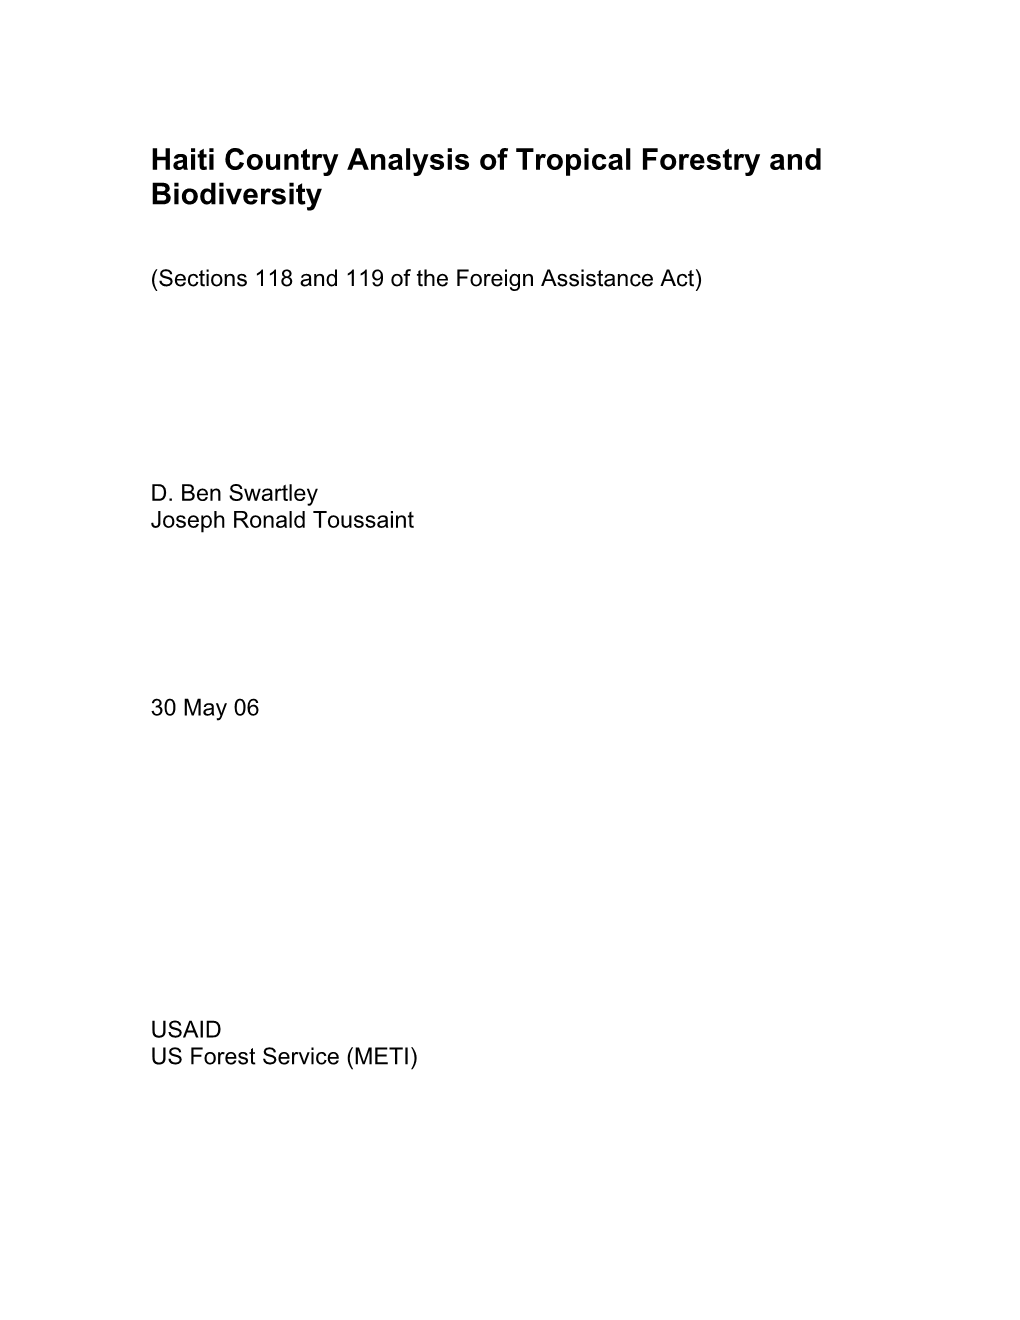 Haiti Country Analysis of Tropical Forestry and Biodiversity